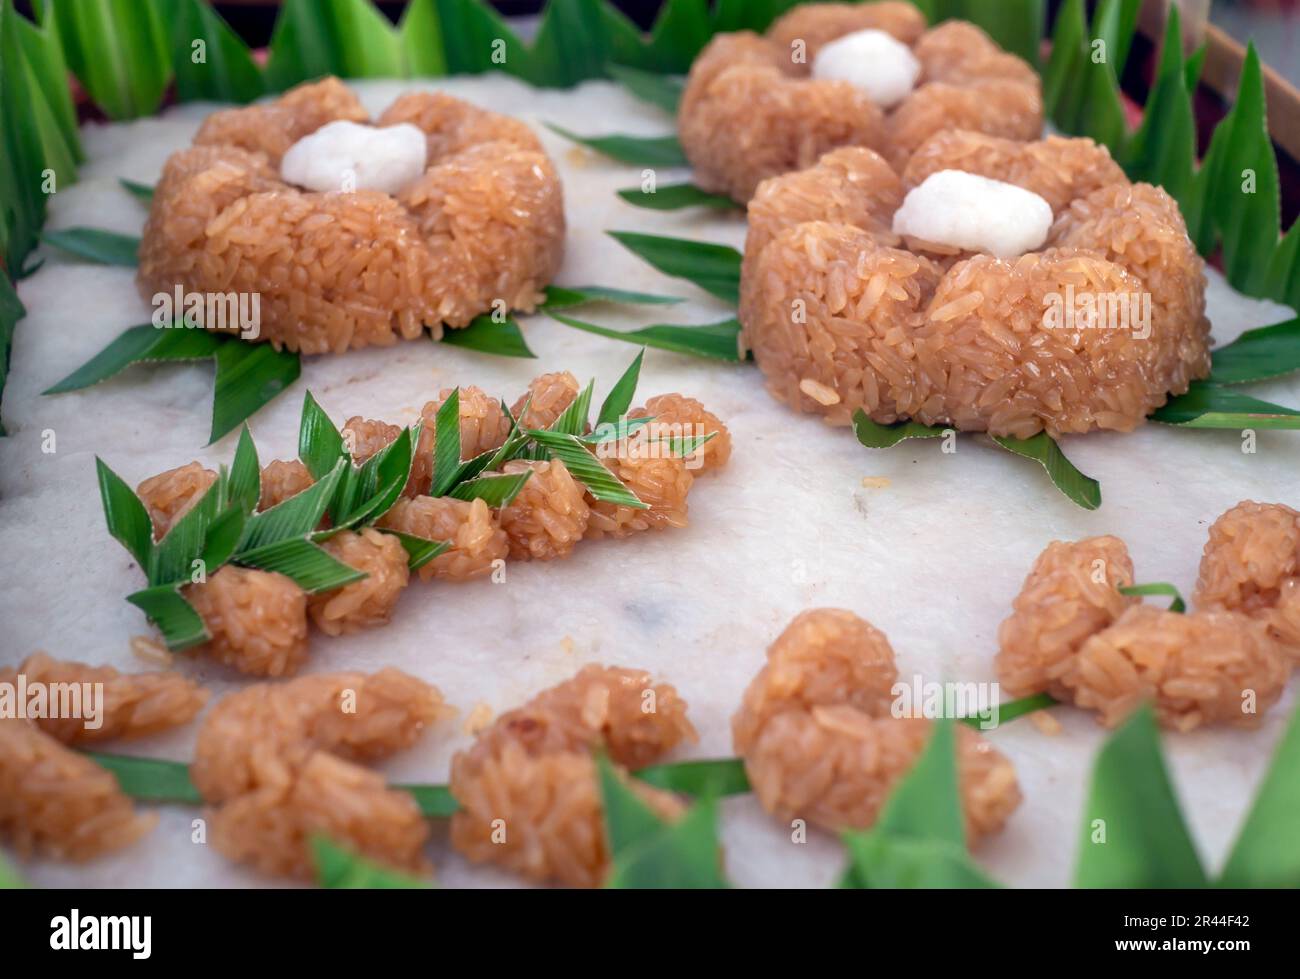 Wajik ketan, indonesian traditional food made from processed glutinous rice mixed with coconut milk and brown sugar. Shallow focus Stock Photo